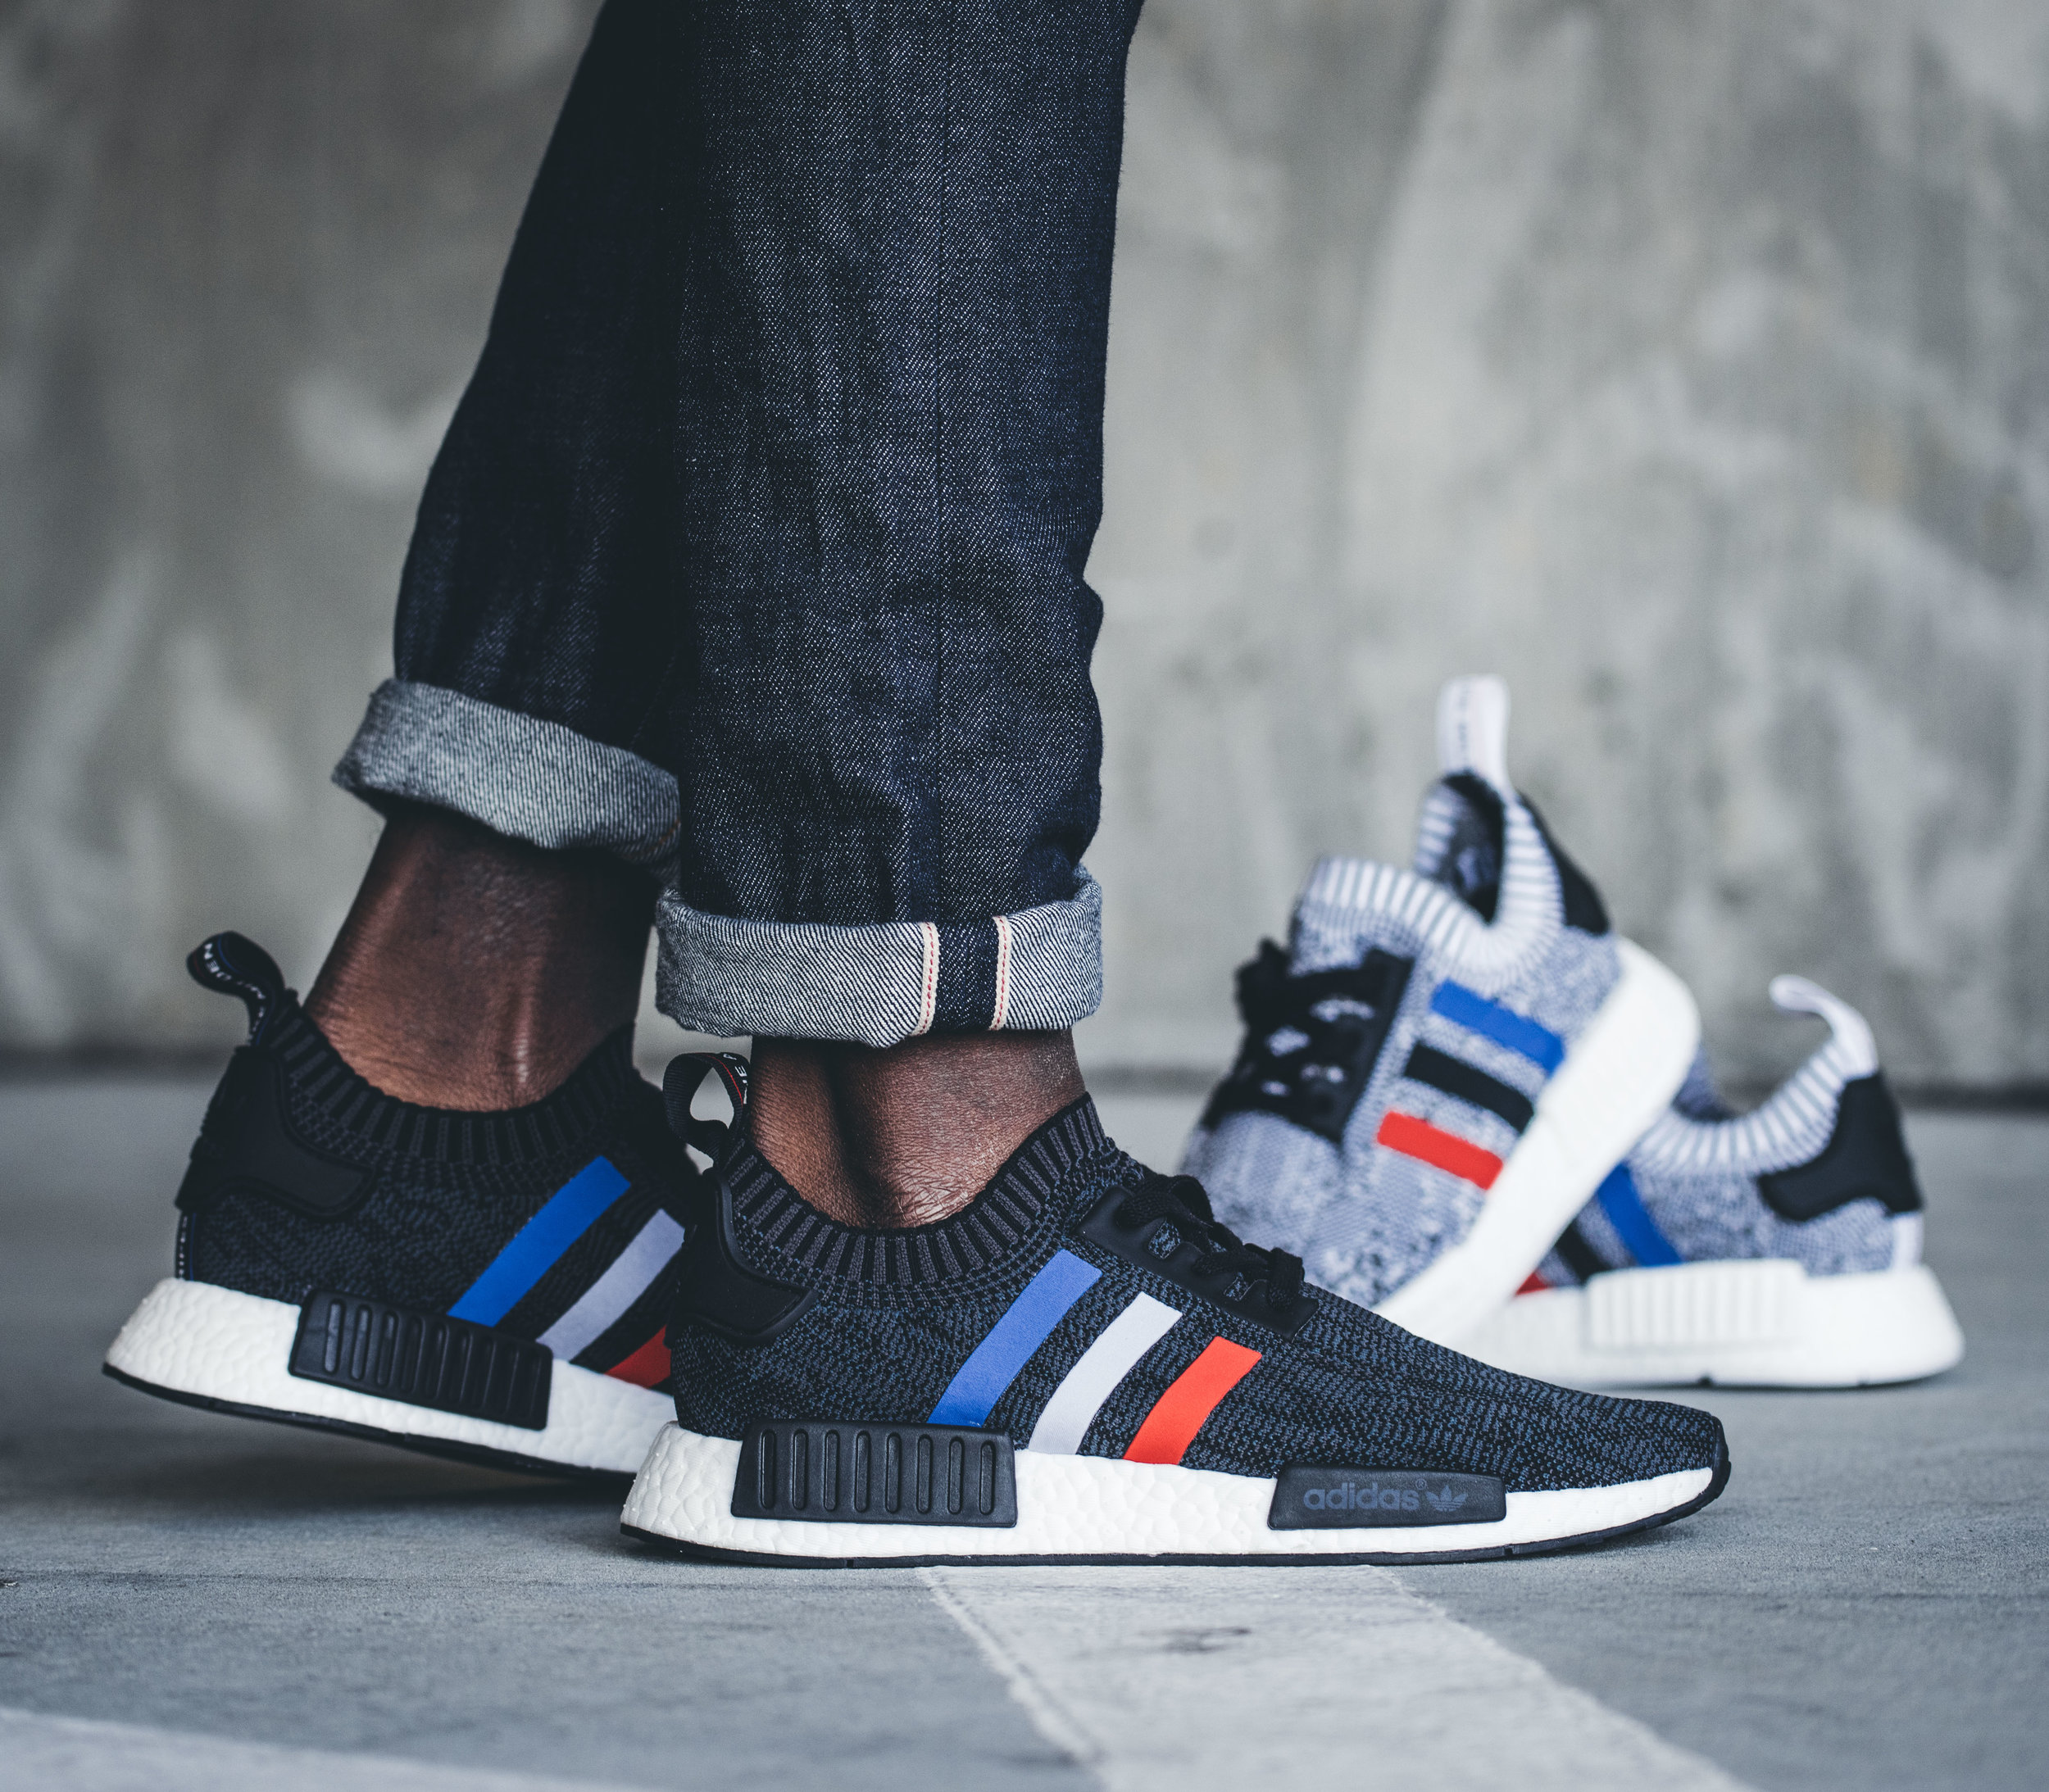 Available: Adidas NMD Primeknit "Tri-Color Pack" —